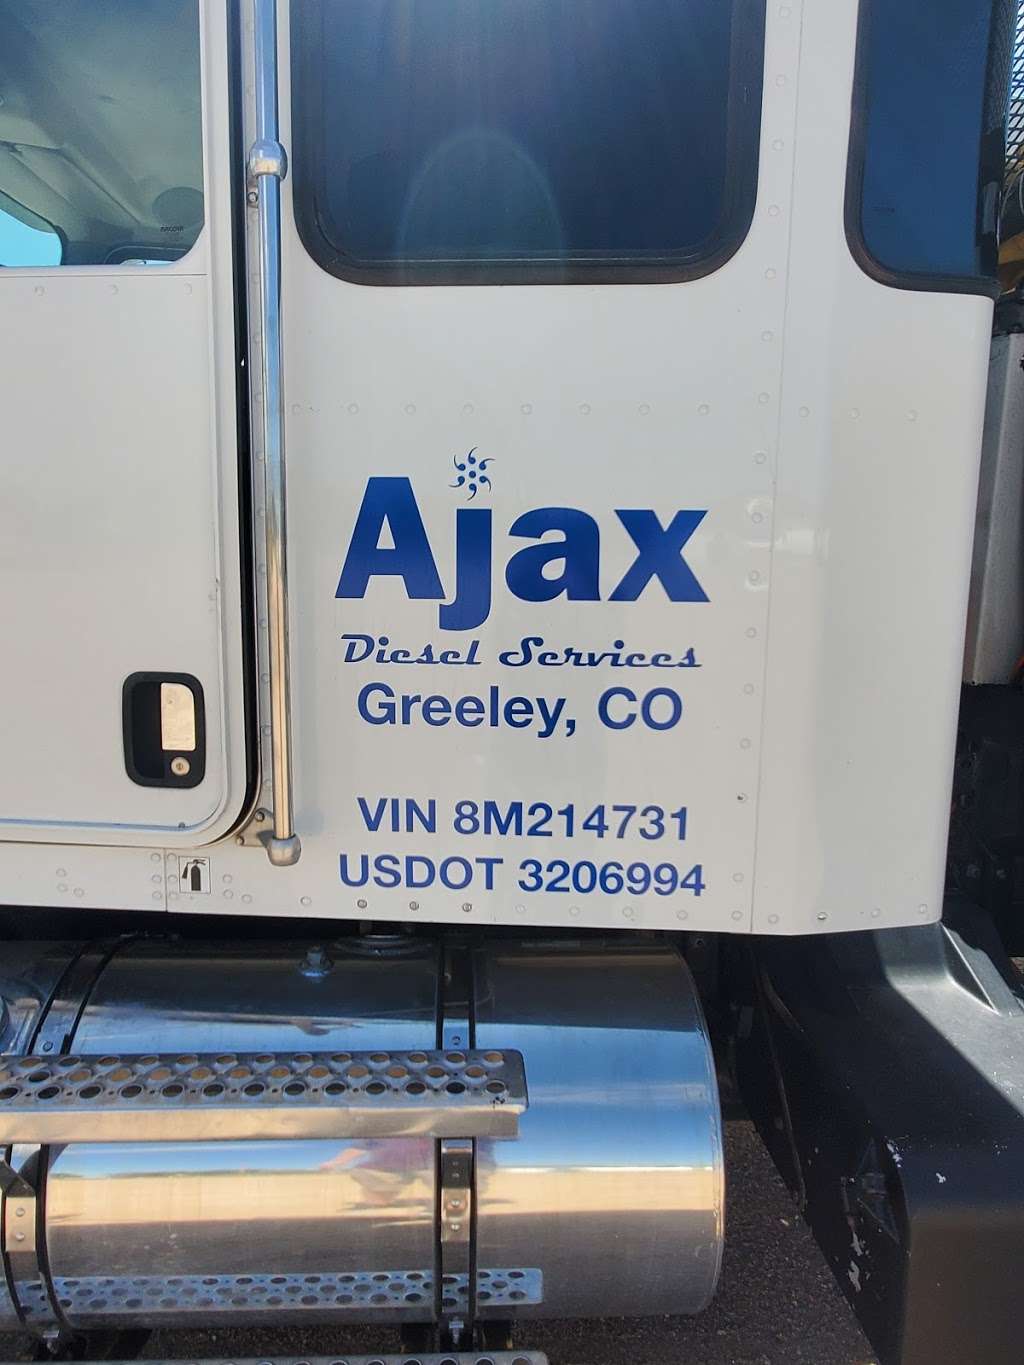 Ajax Diesel Services | 1624 E Hwy 34, Greeley, CO 80631, USA | Phone: 970-381-0325